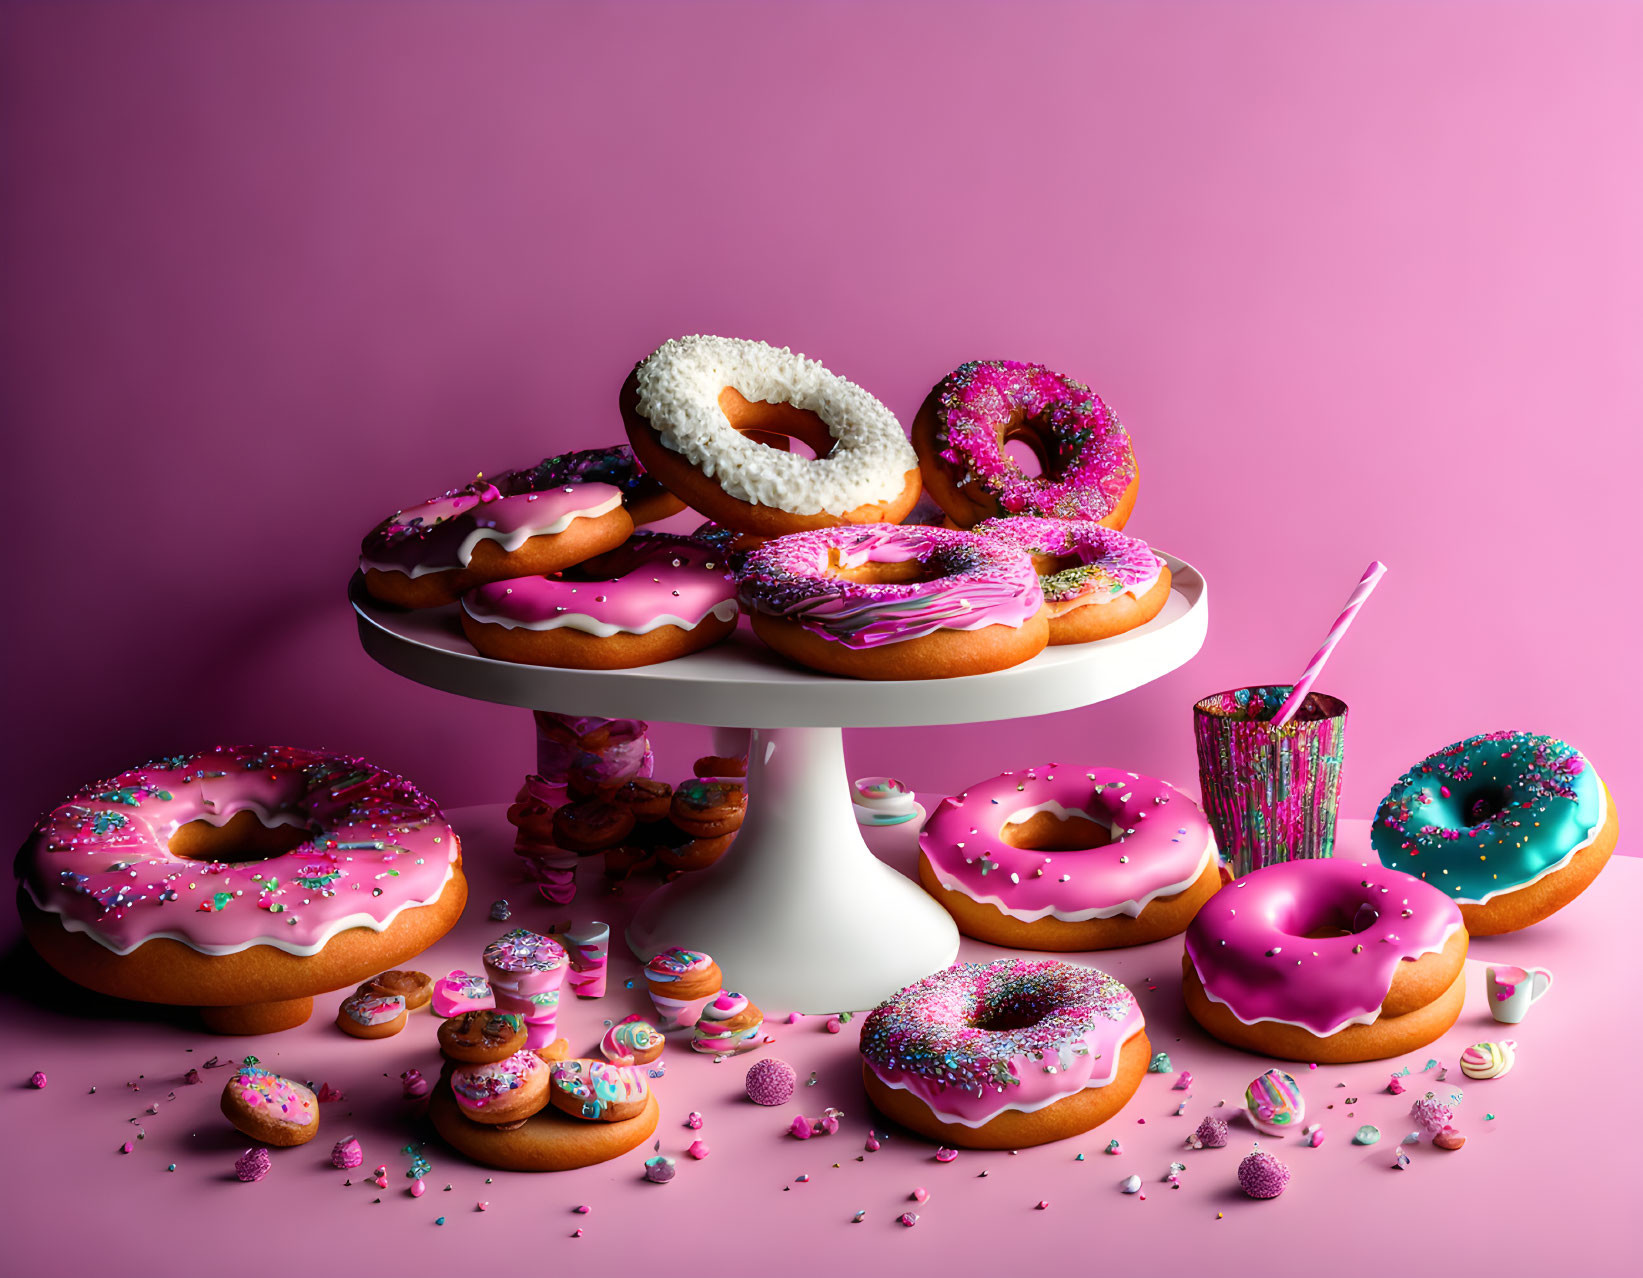 Pink donuts on a platter, pink background 